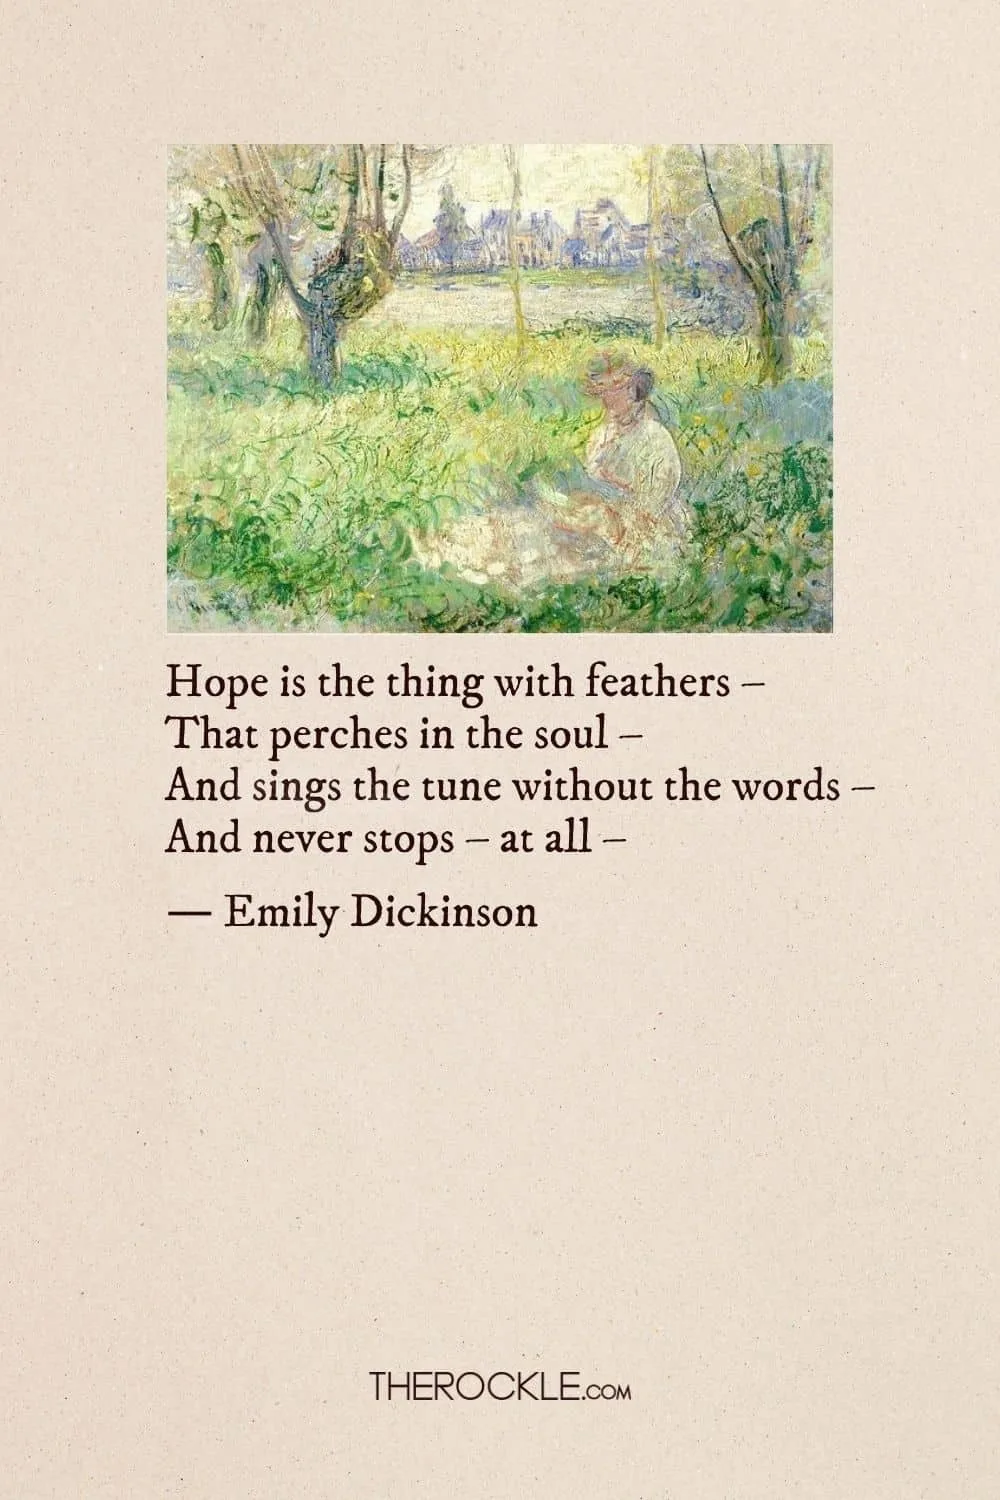 Emily Dickinson's quote about hope